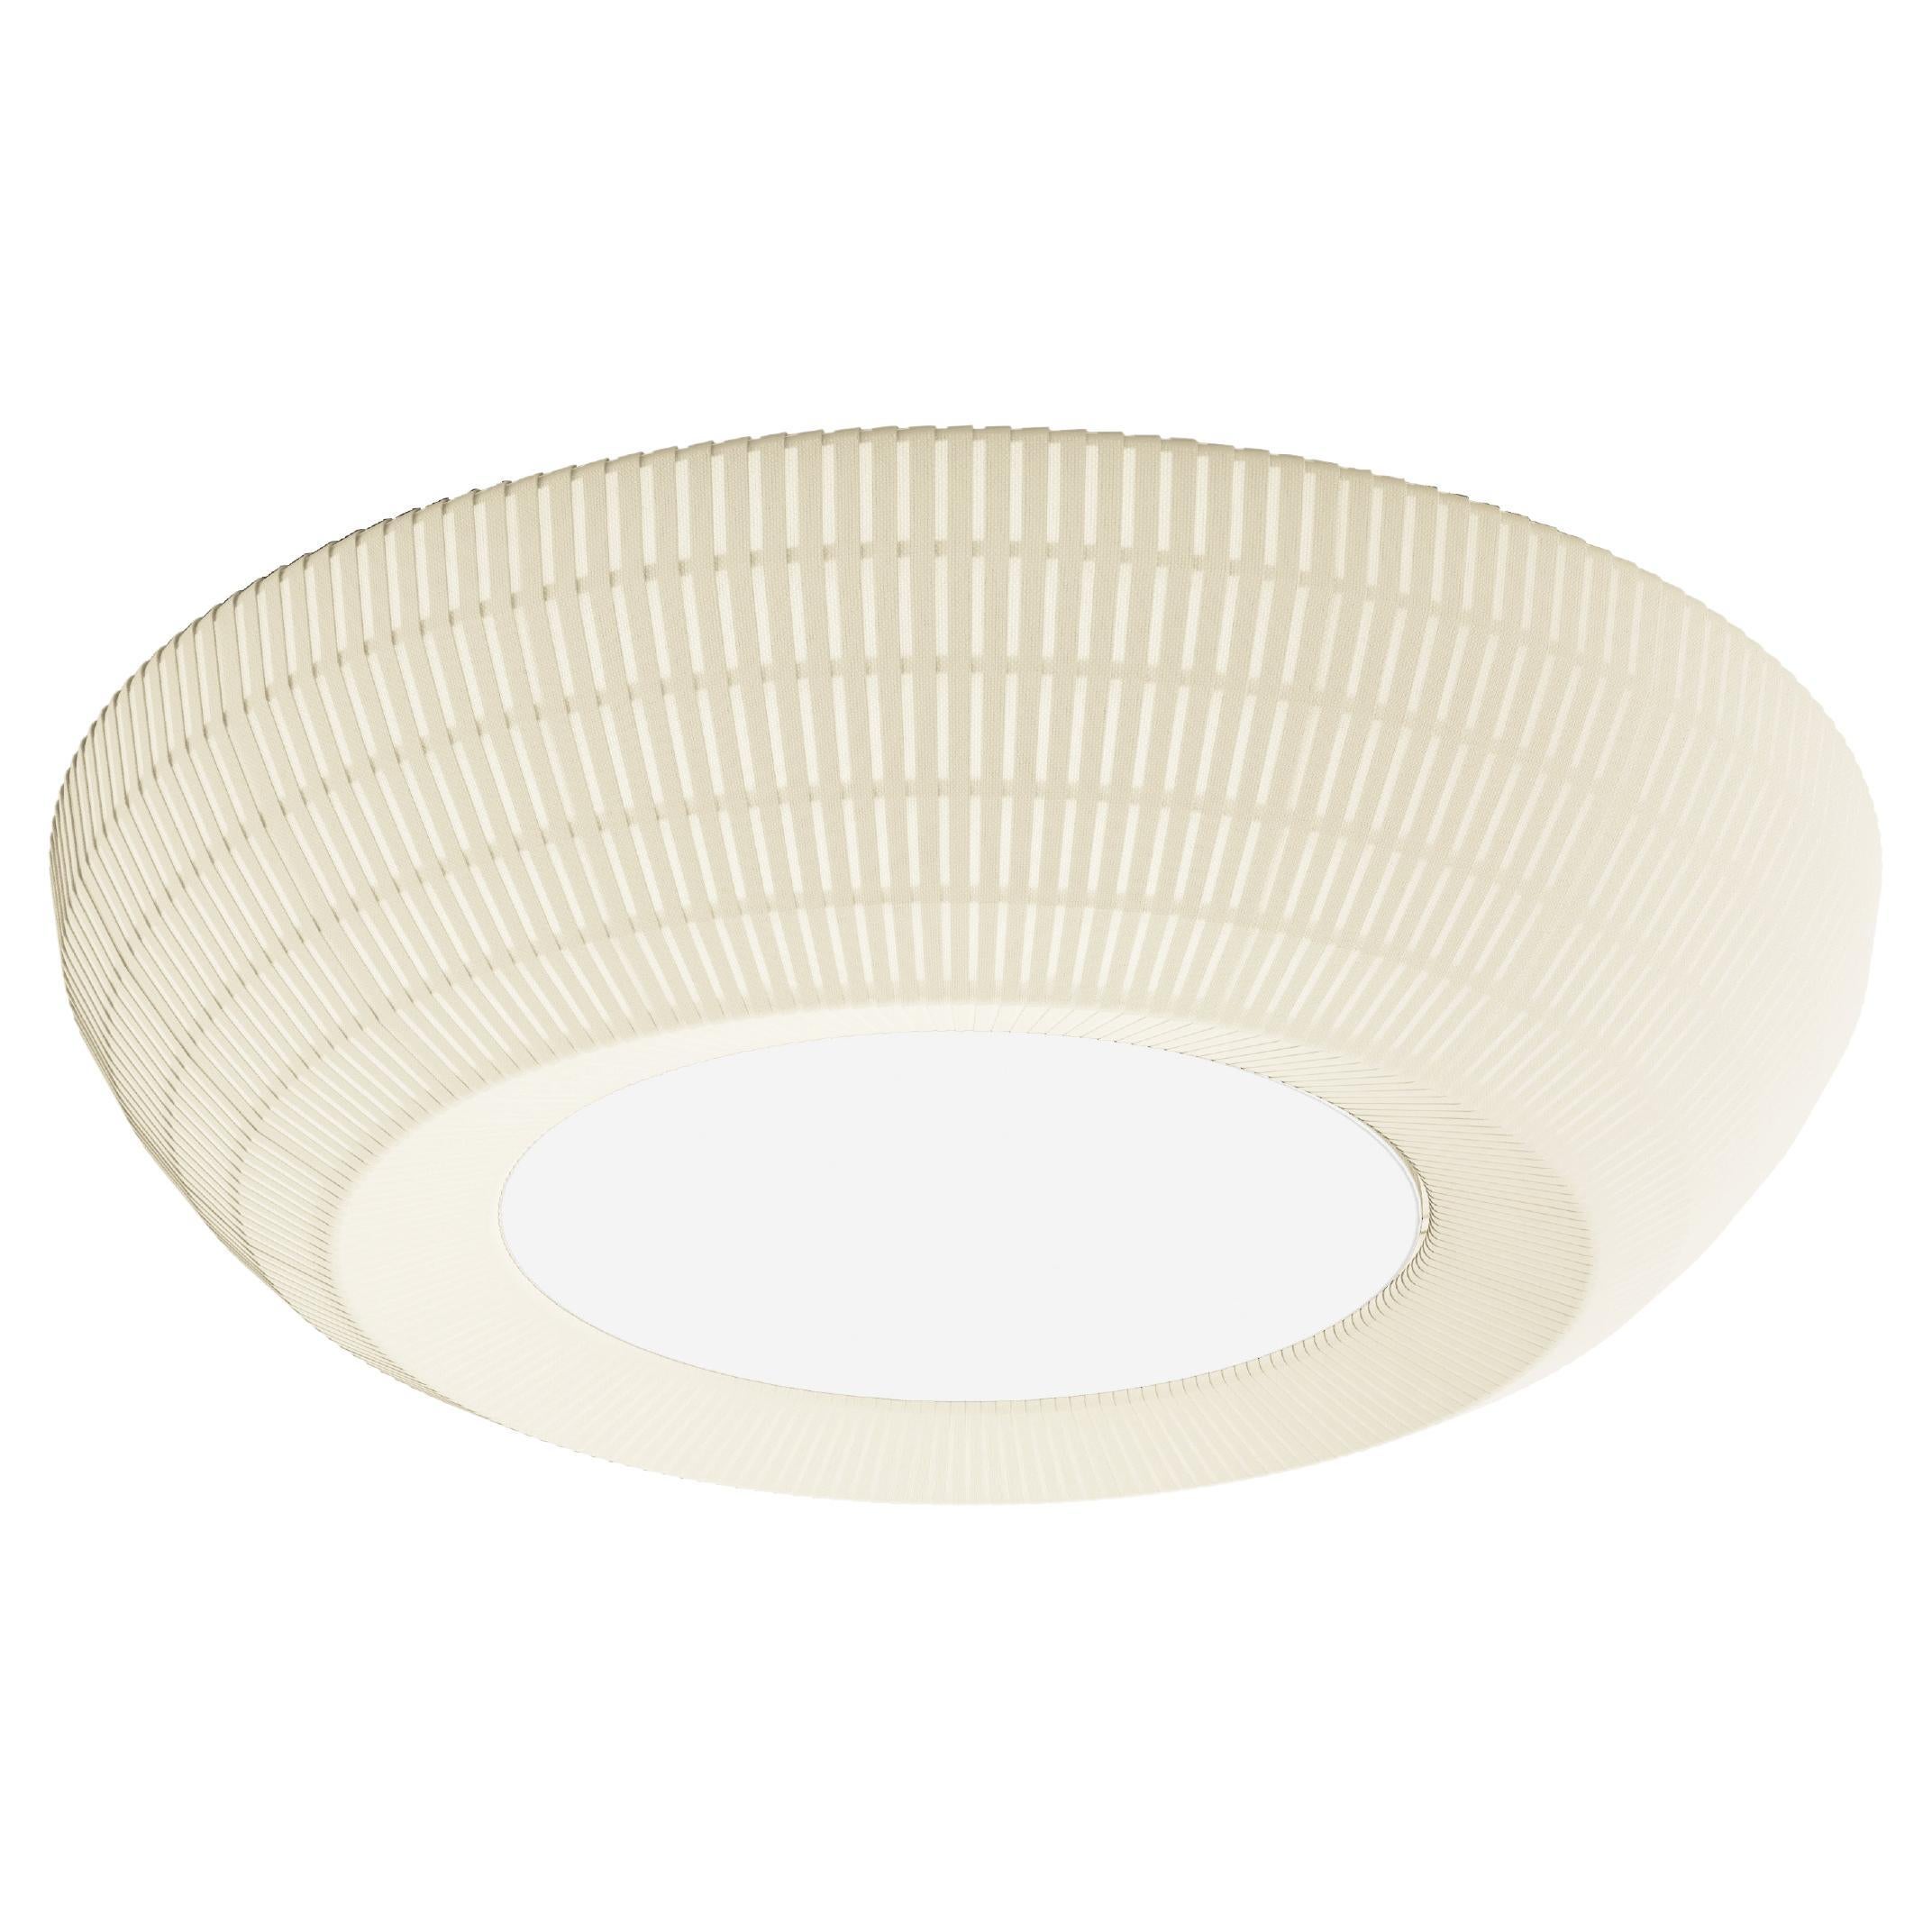 Axolight Bell Large Ceiling Lamp in Warm White by Manuel & Vanessa Vivian For Sale